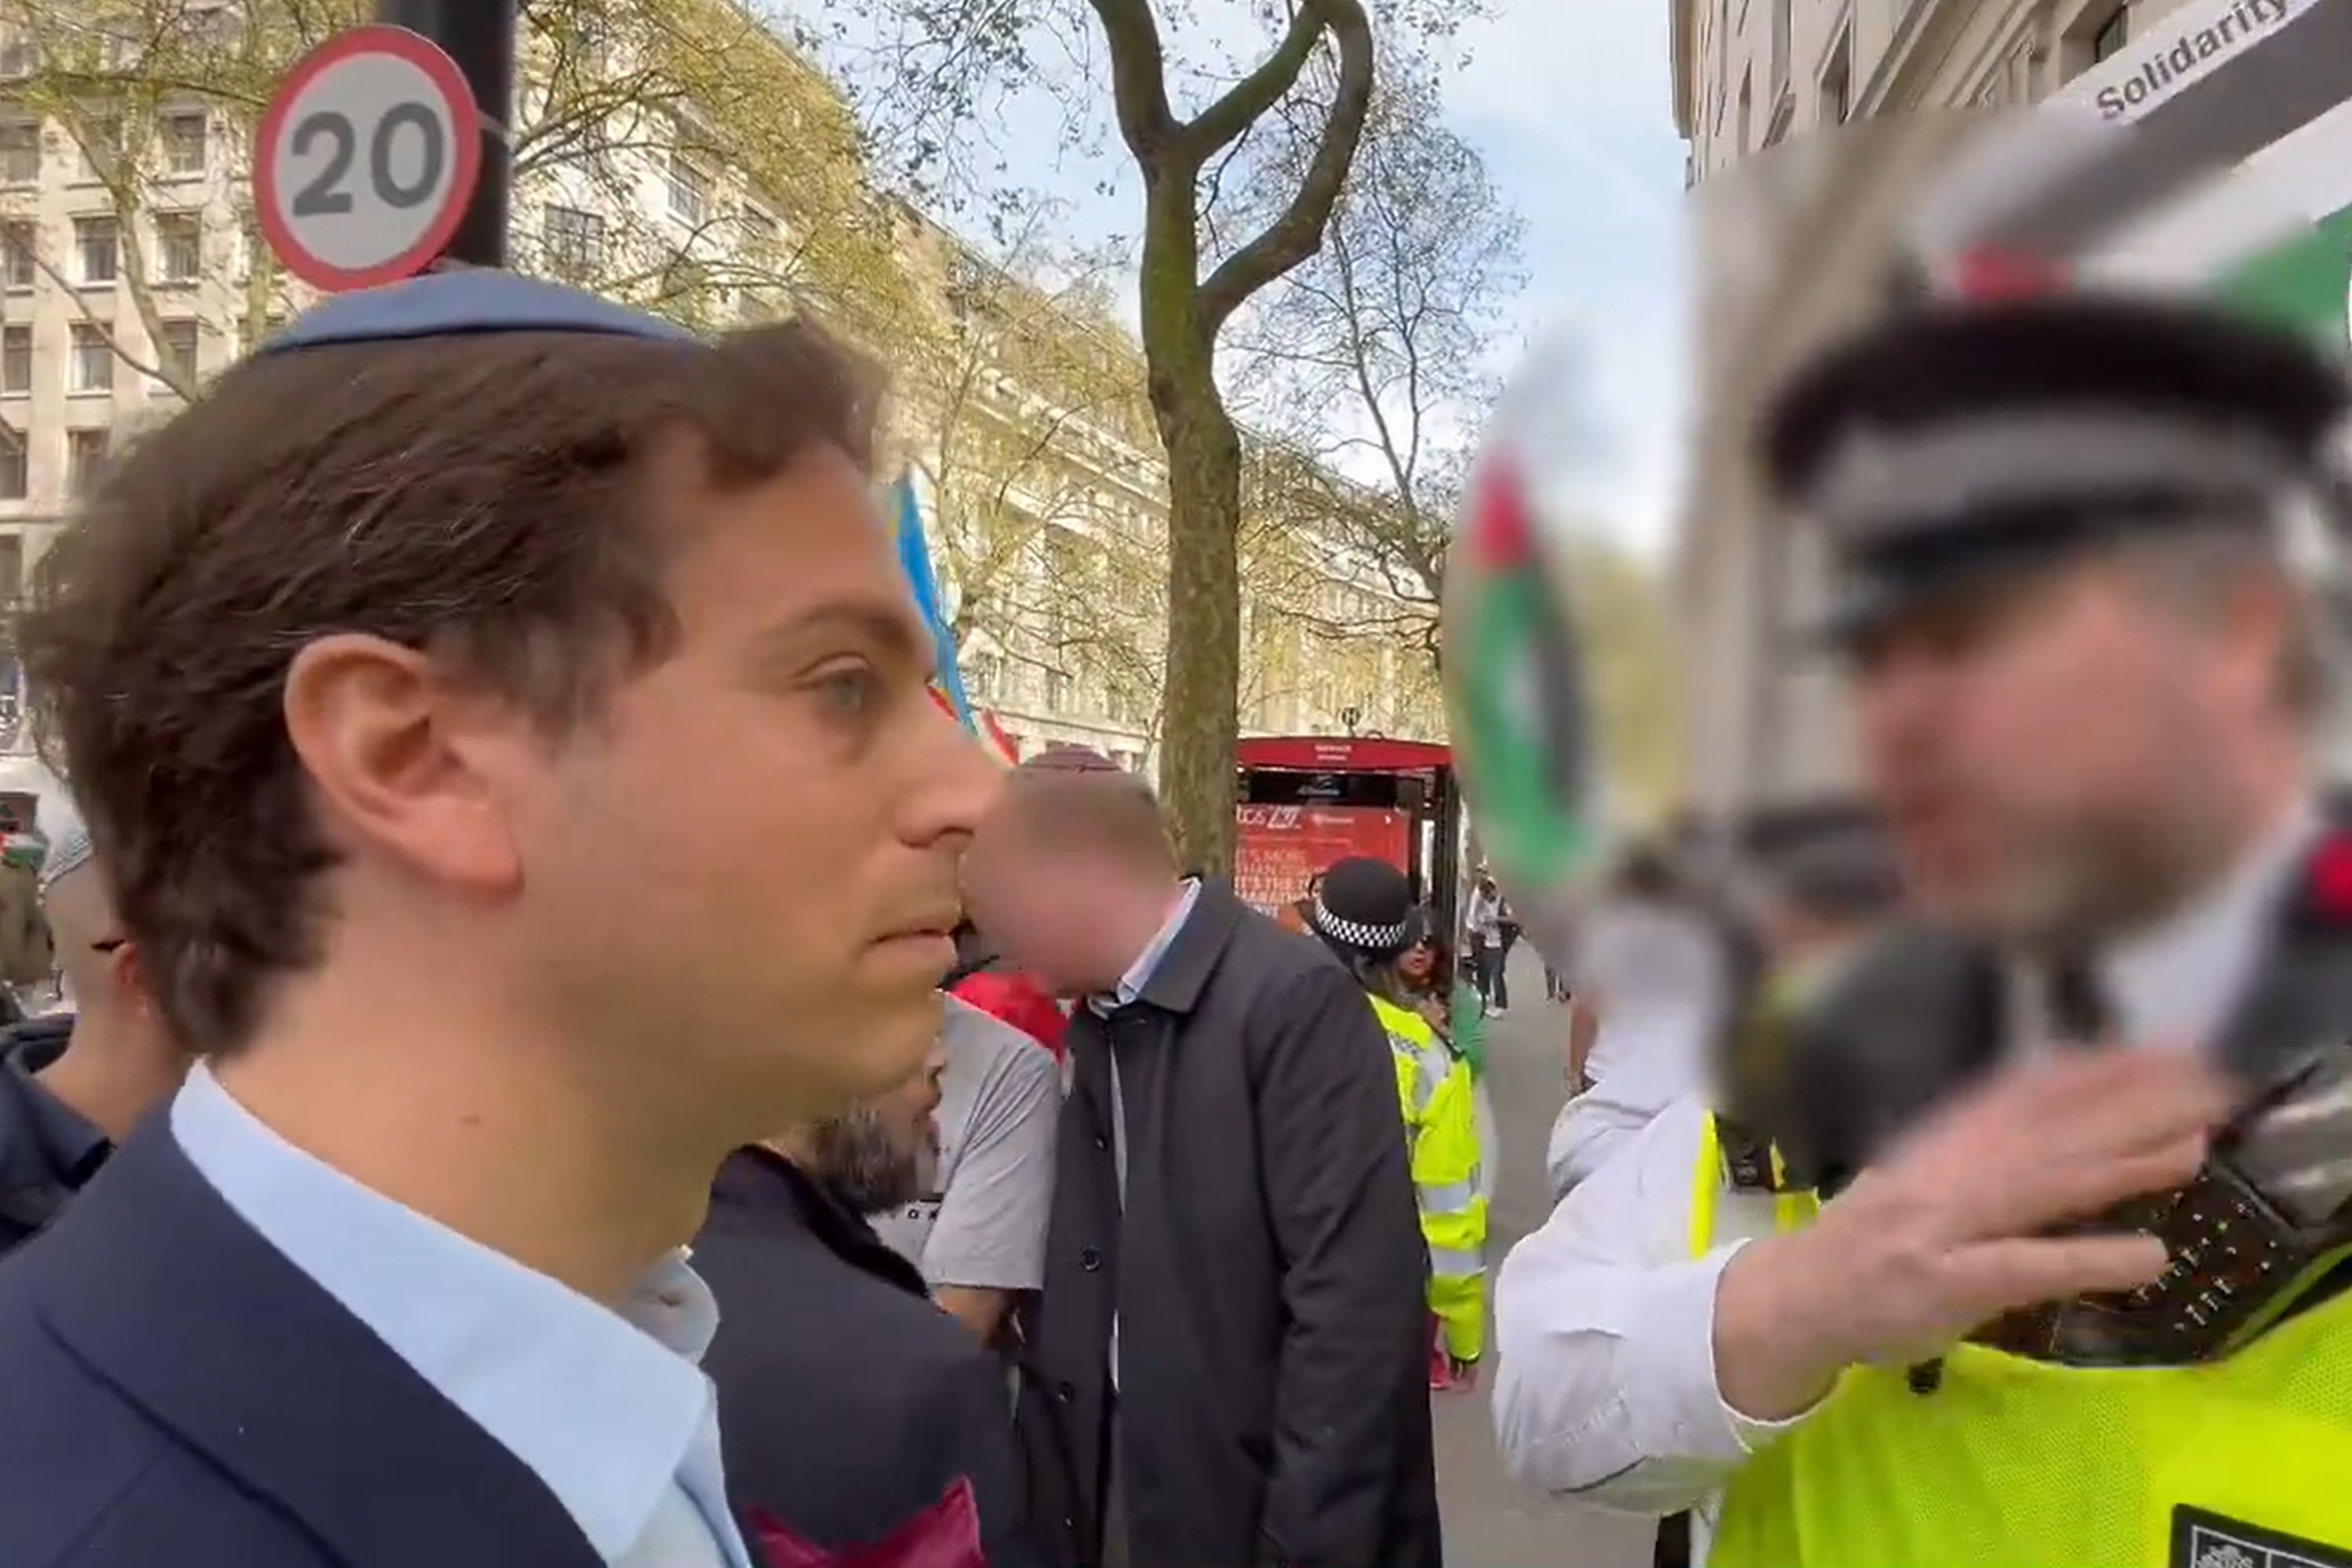 Gideon Falter was told he looked ‘openly Jewish’ by a Metropolitan Police officer